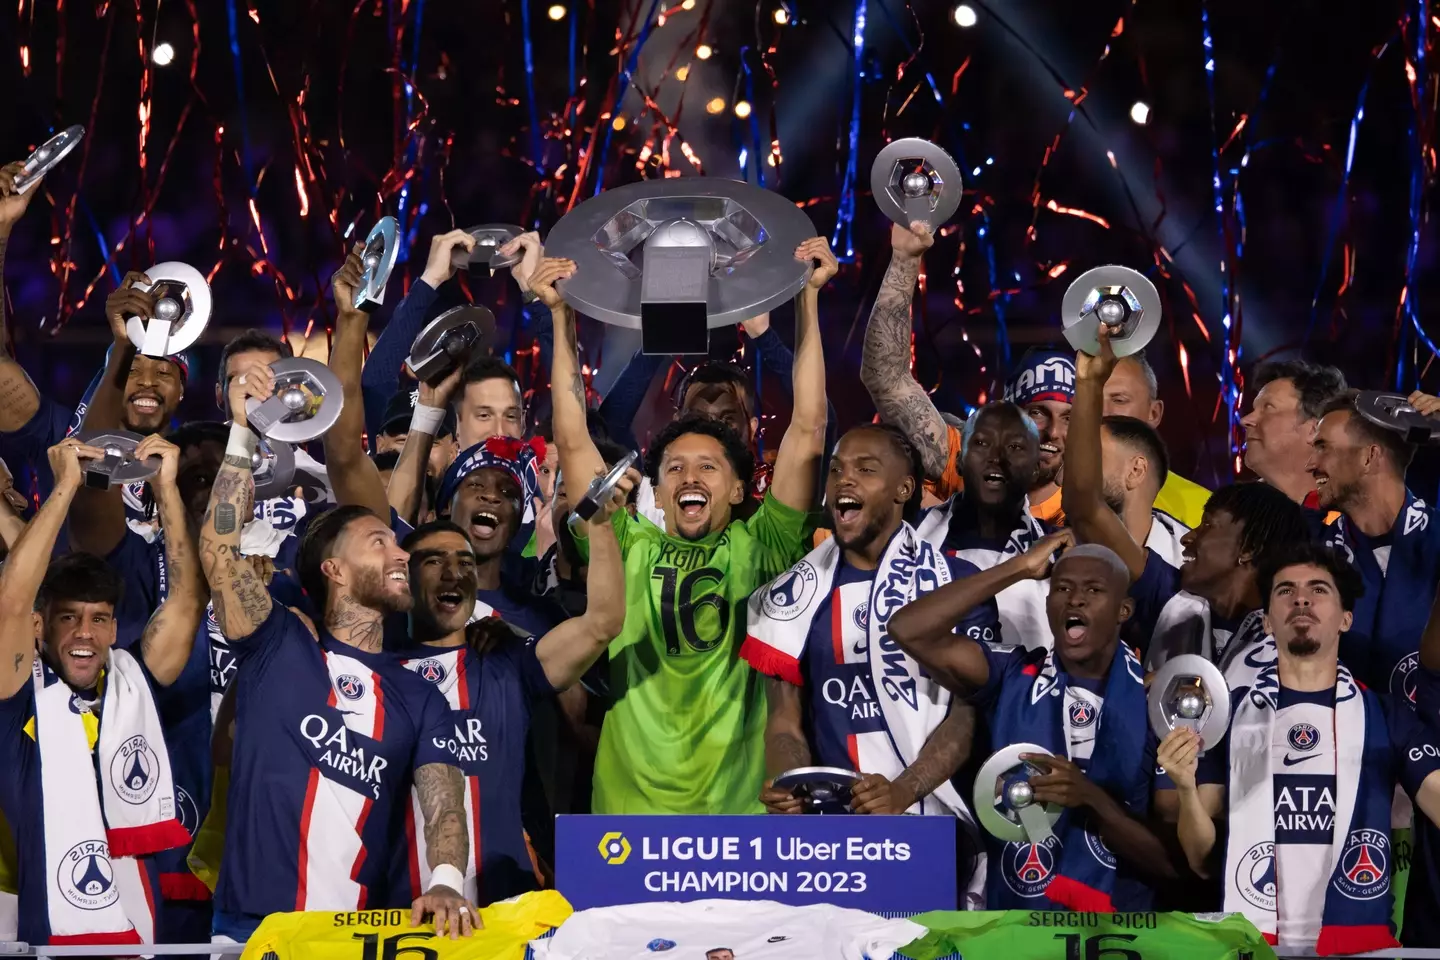 PSG lifted the Ligue 1 trophy yet again this season. (